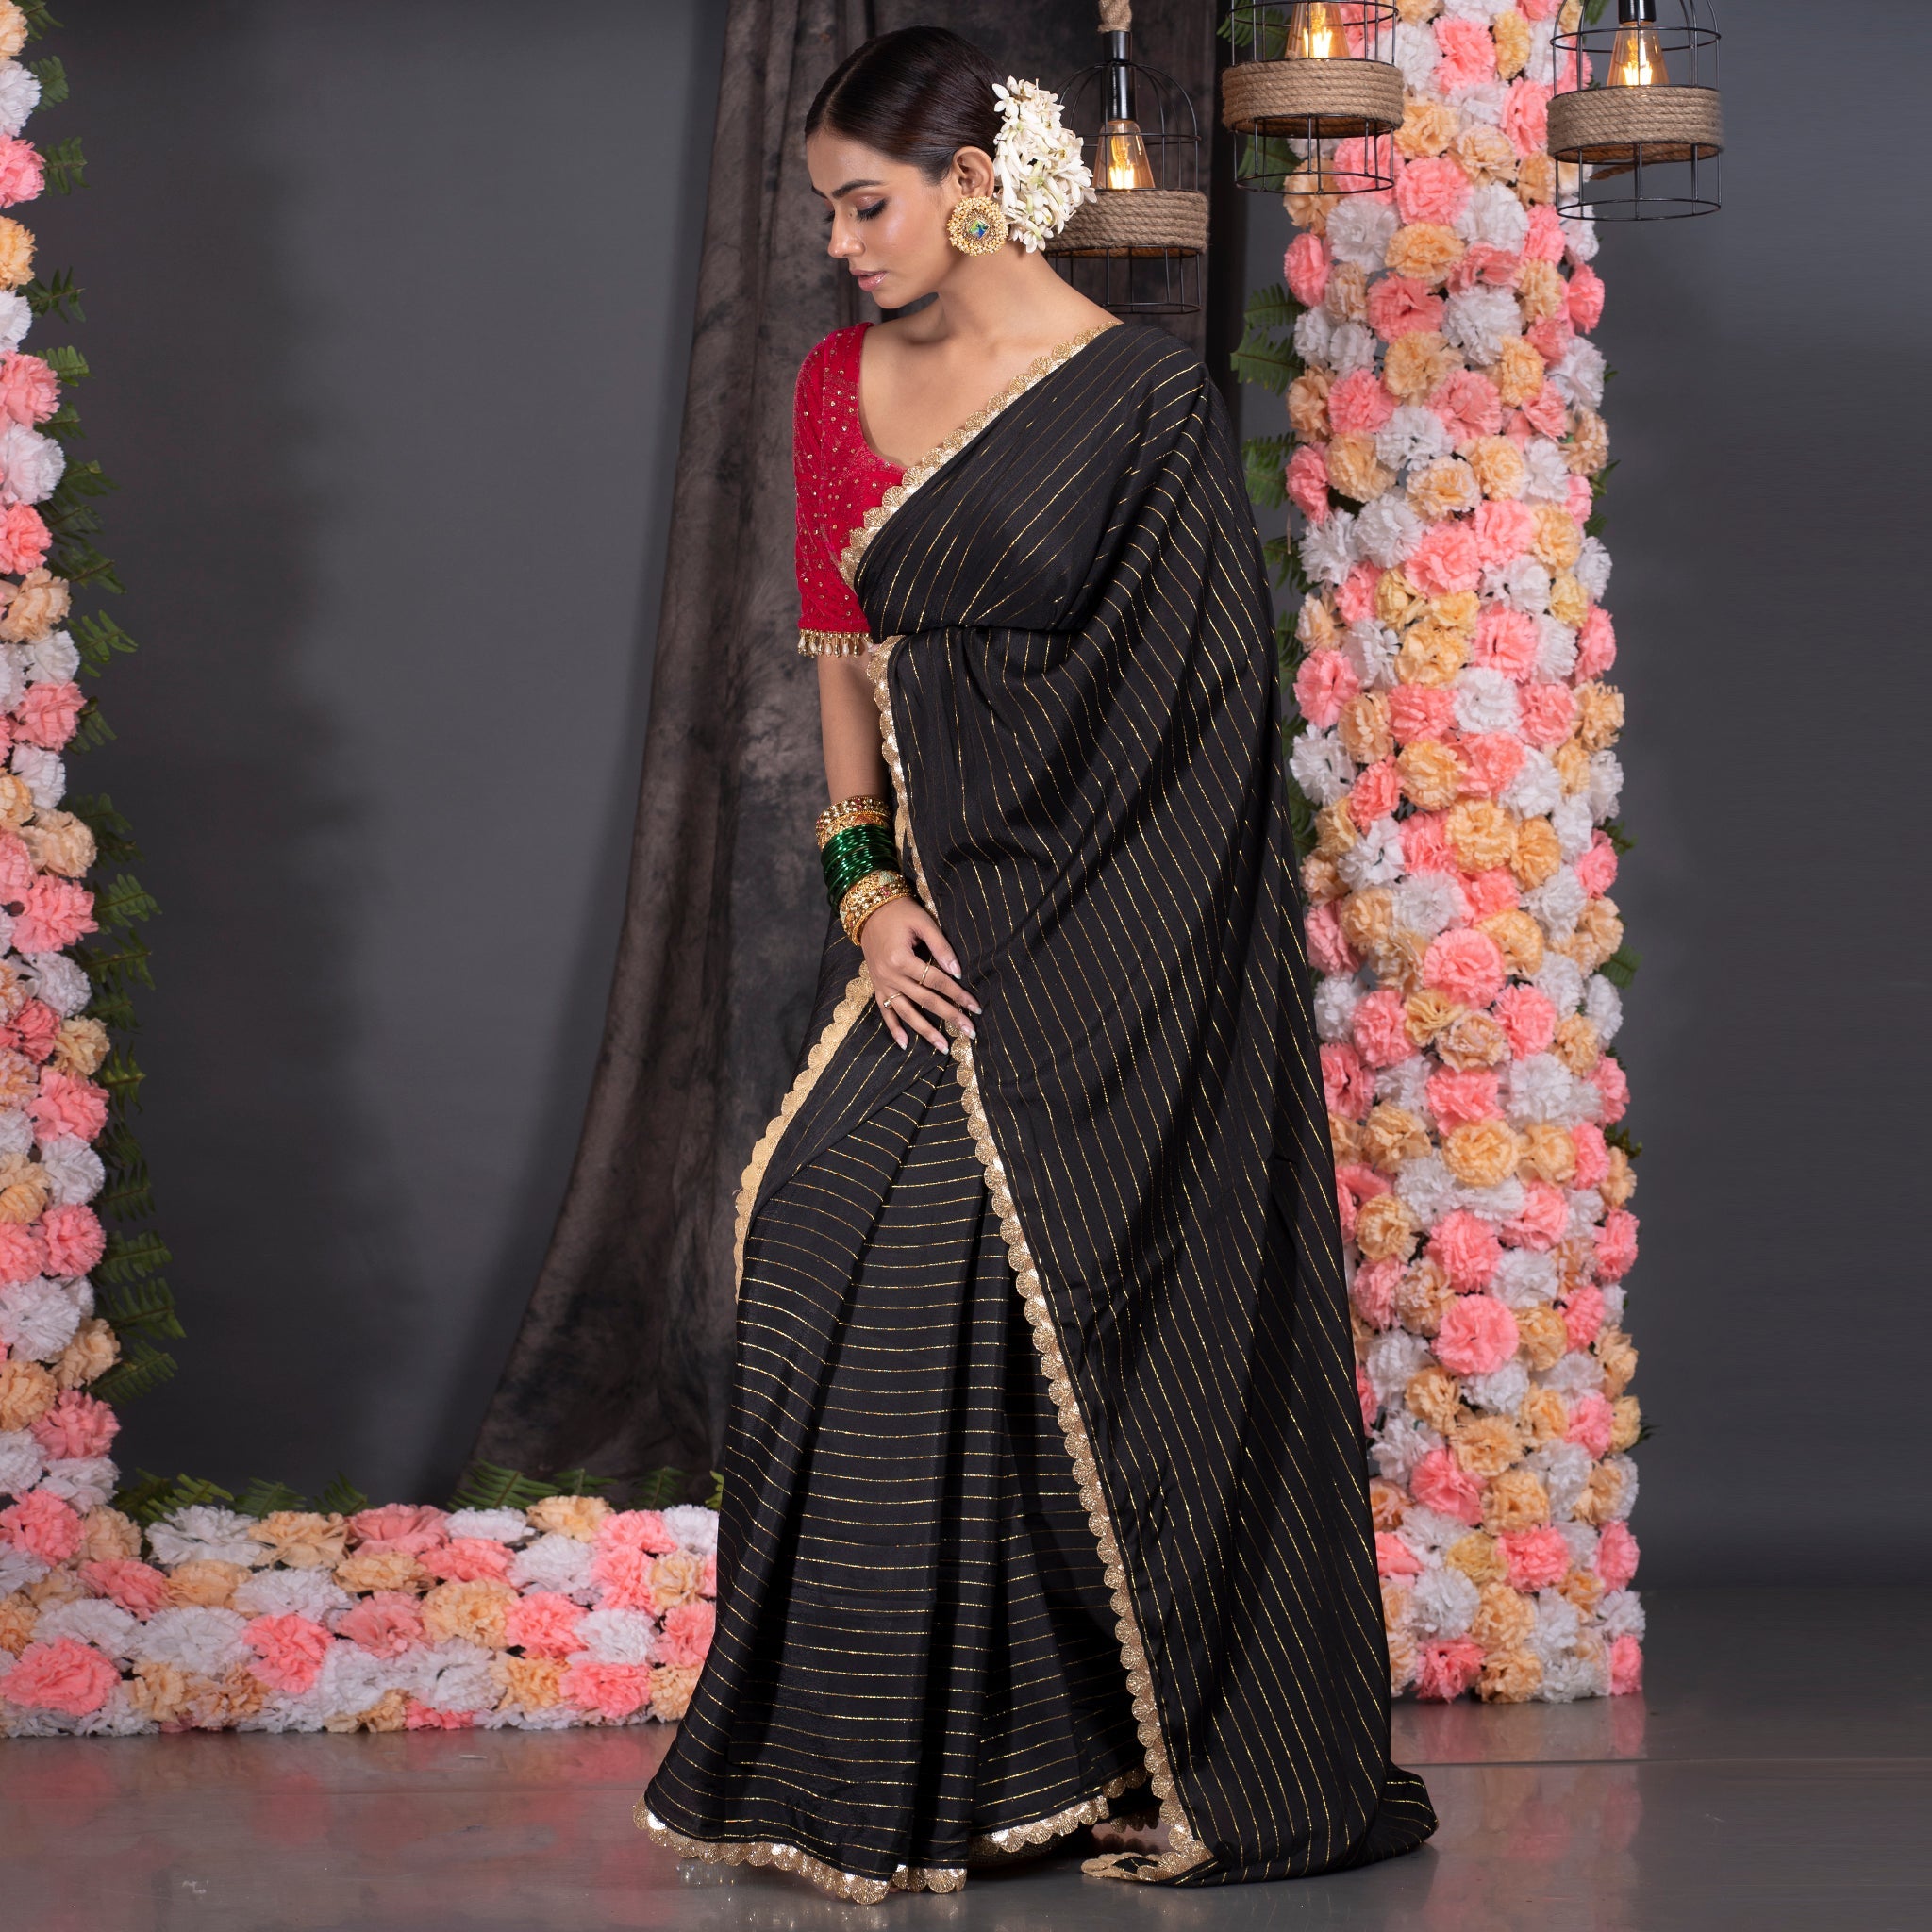 Women's Black Georgette Saree With Lurex Gold Stripes And Scallop Embroidered Border - Boveee